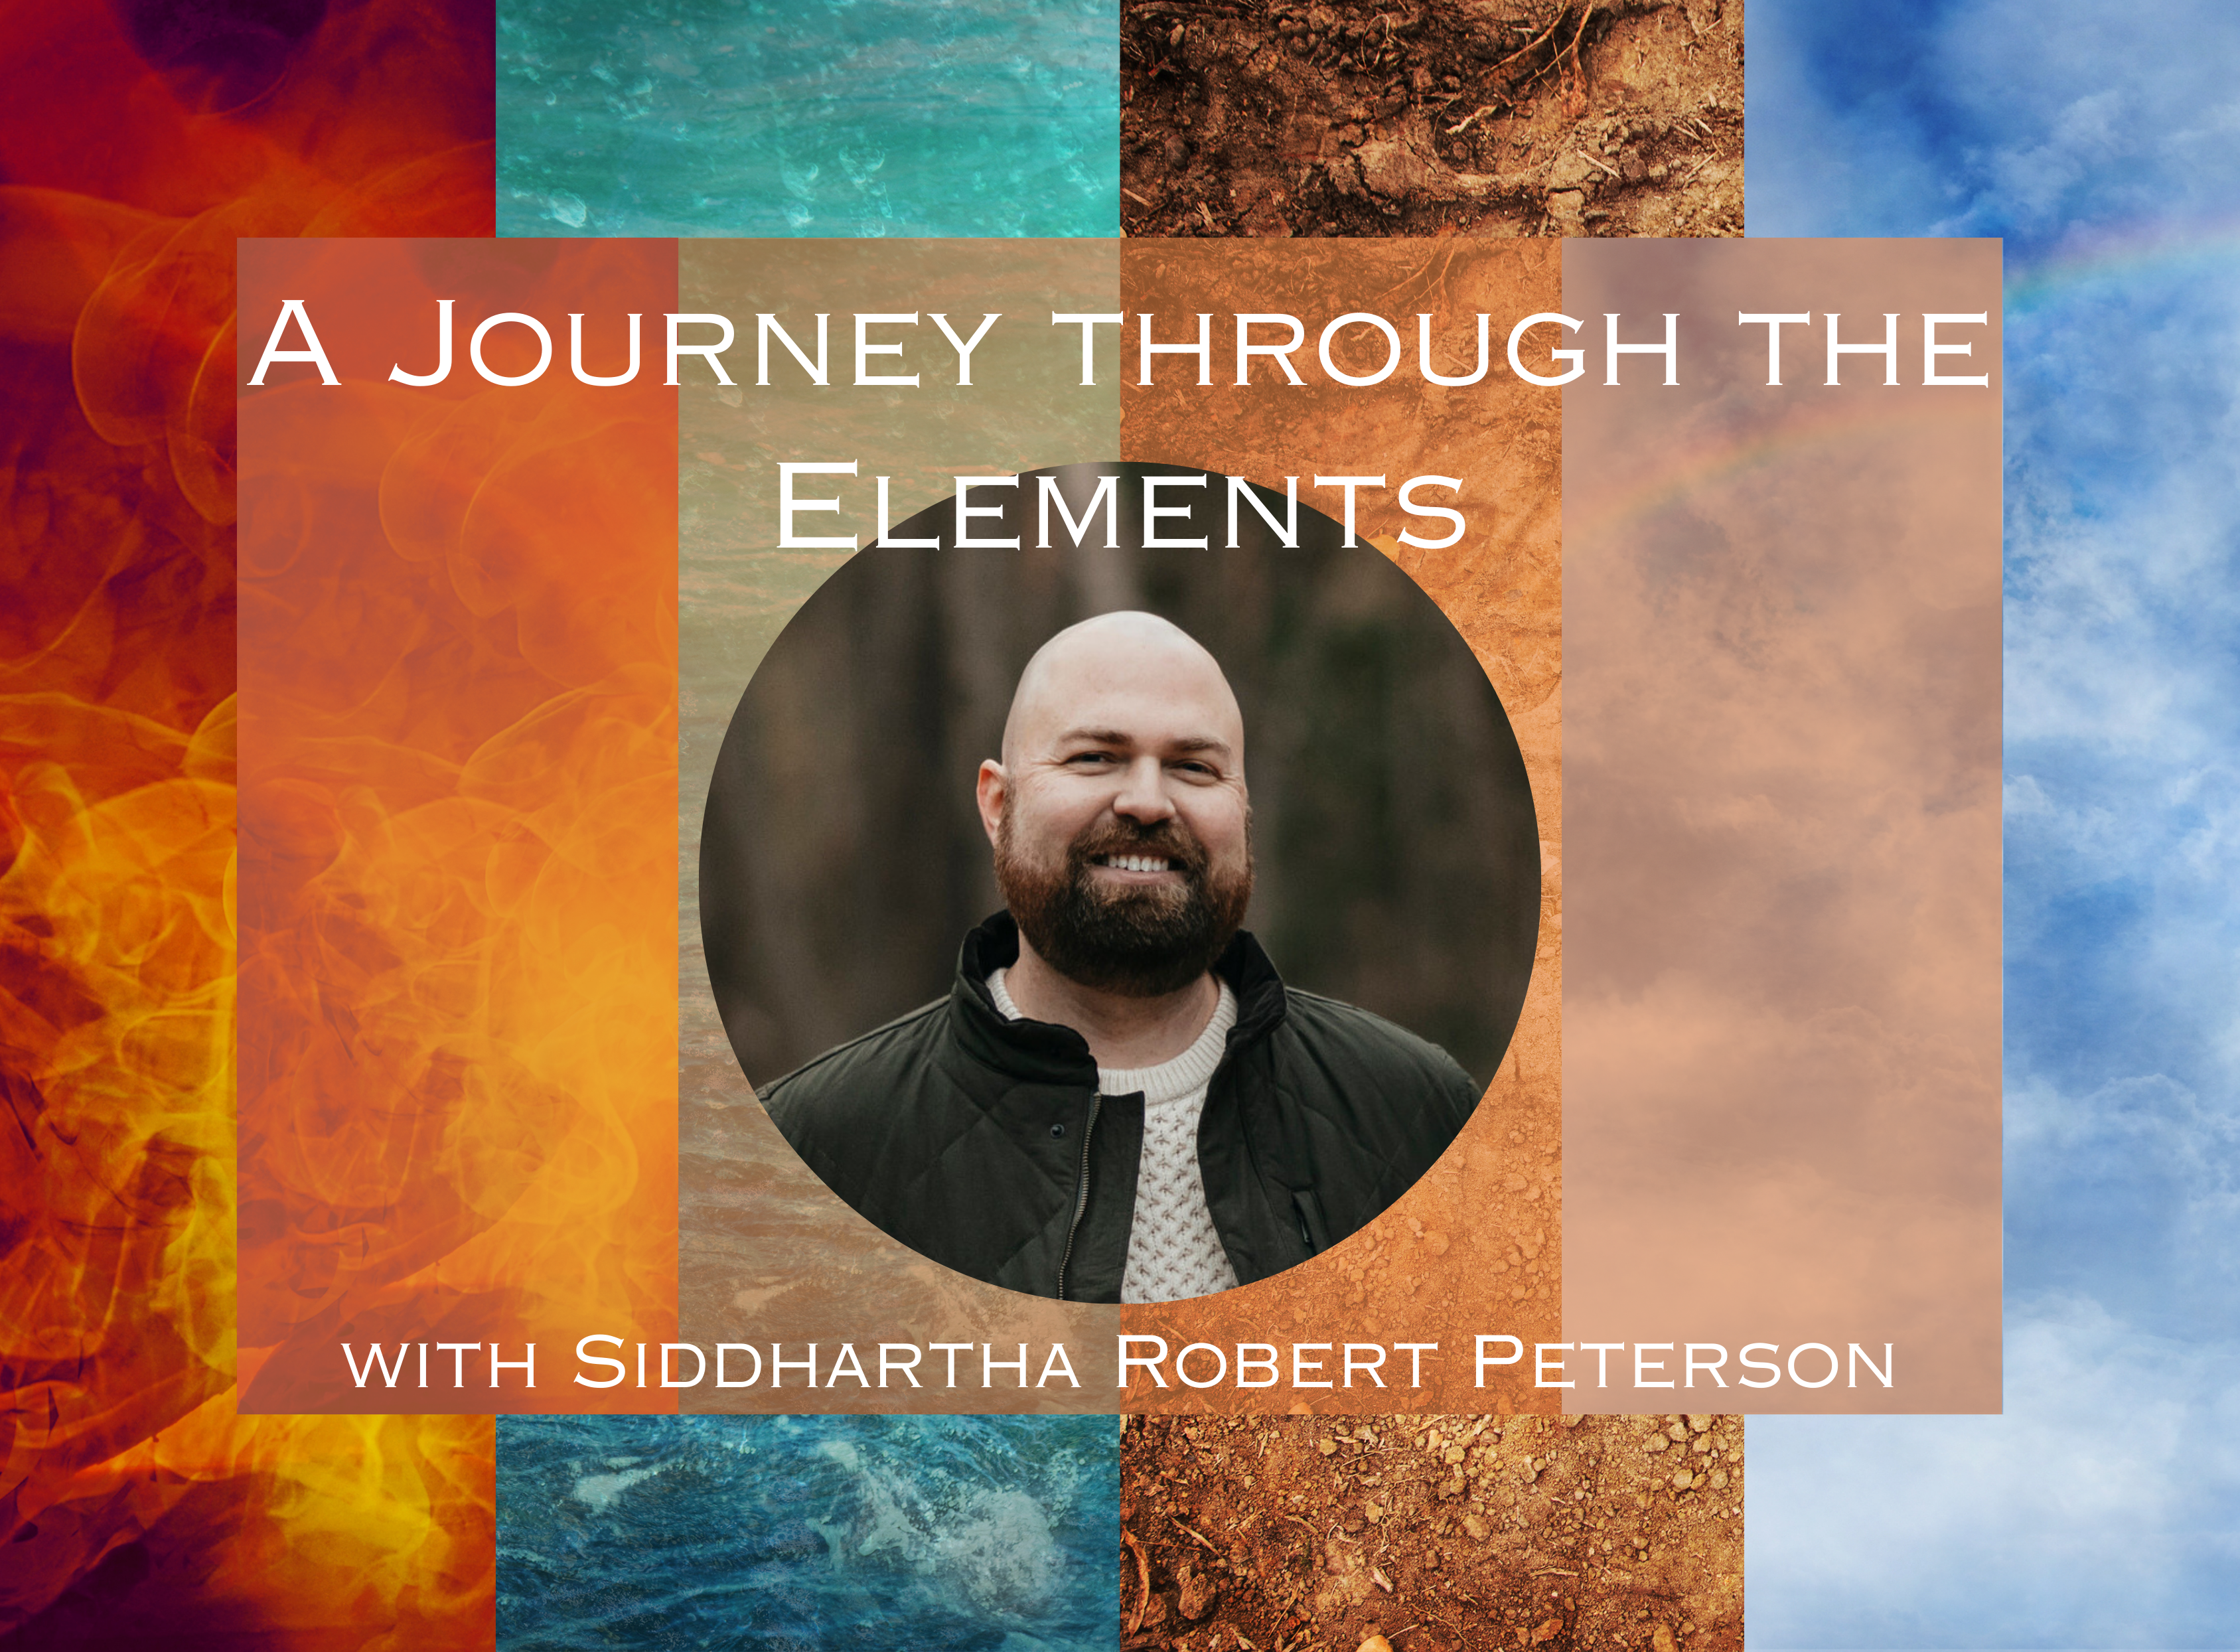 A Journey through the Elements